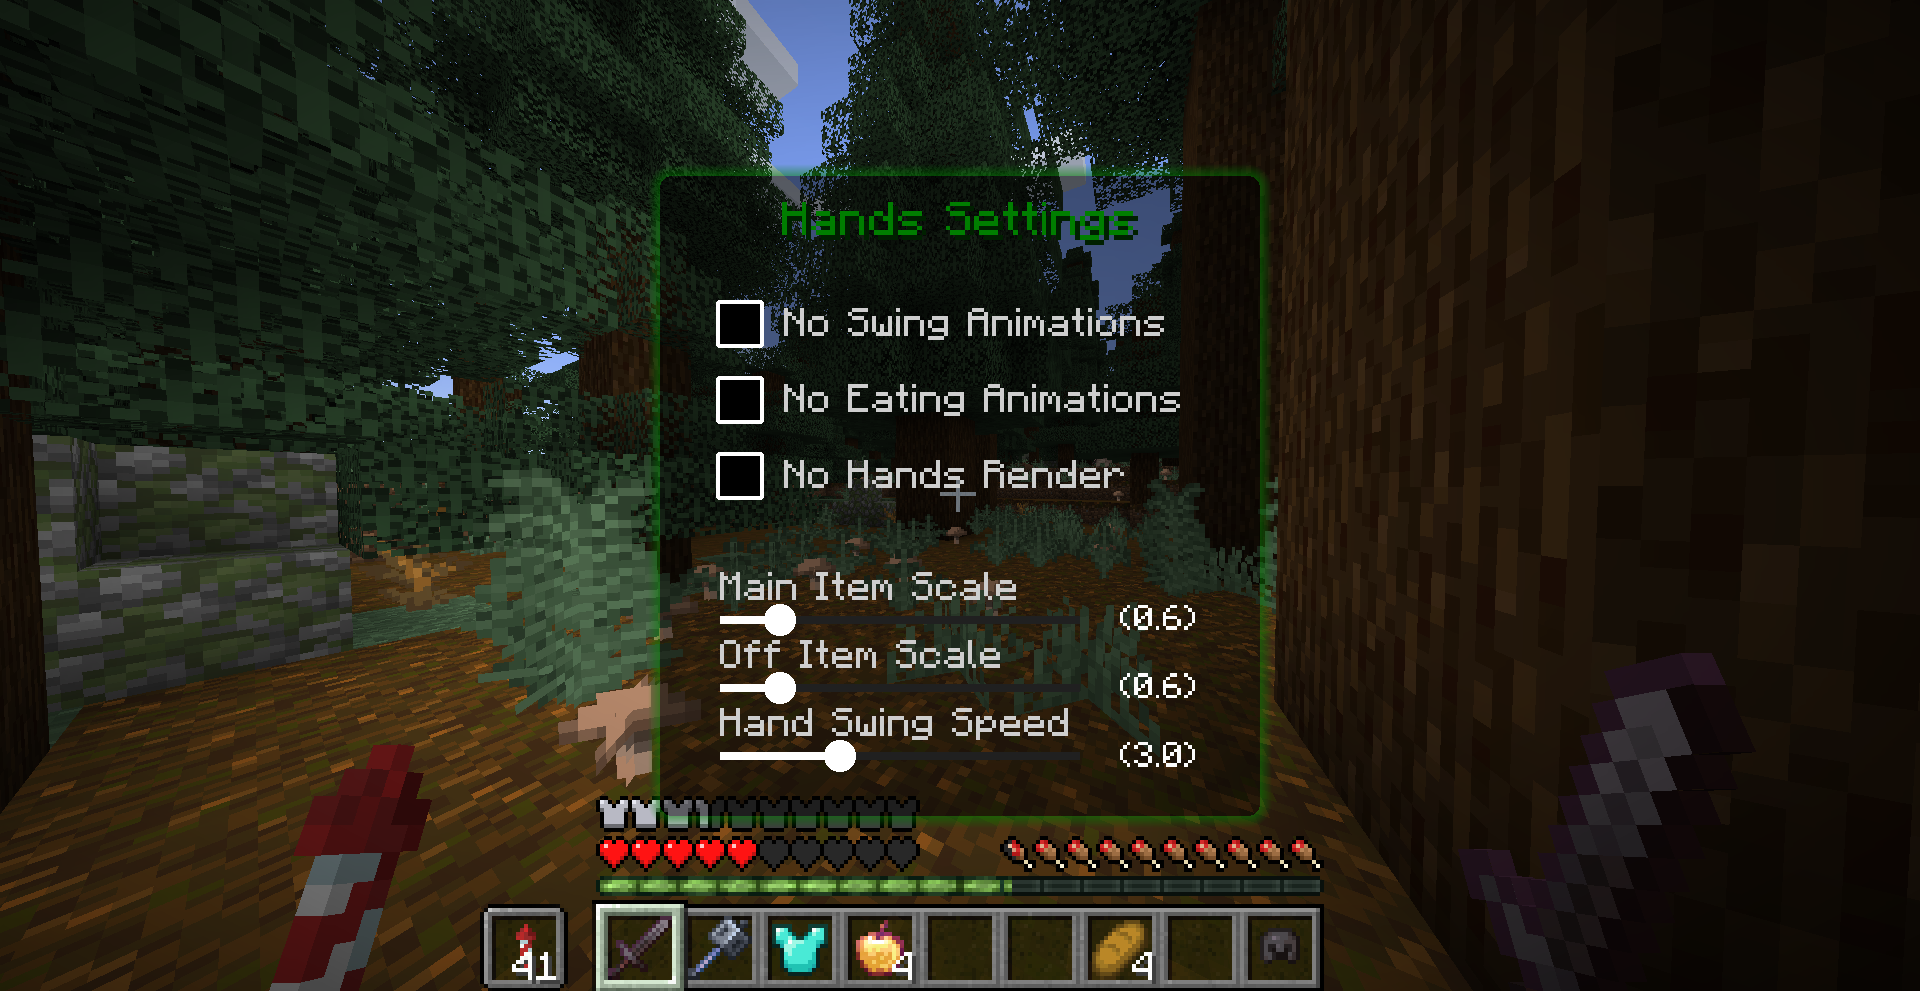 Second GUI with more settings